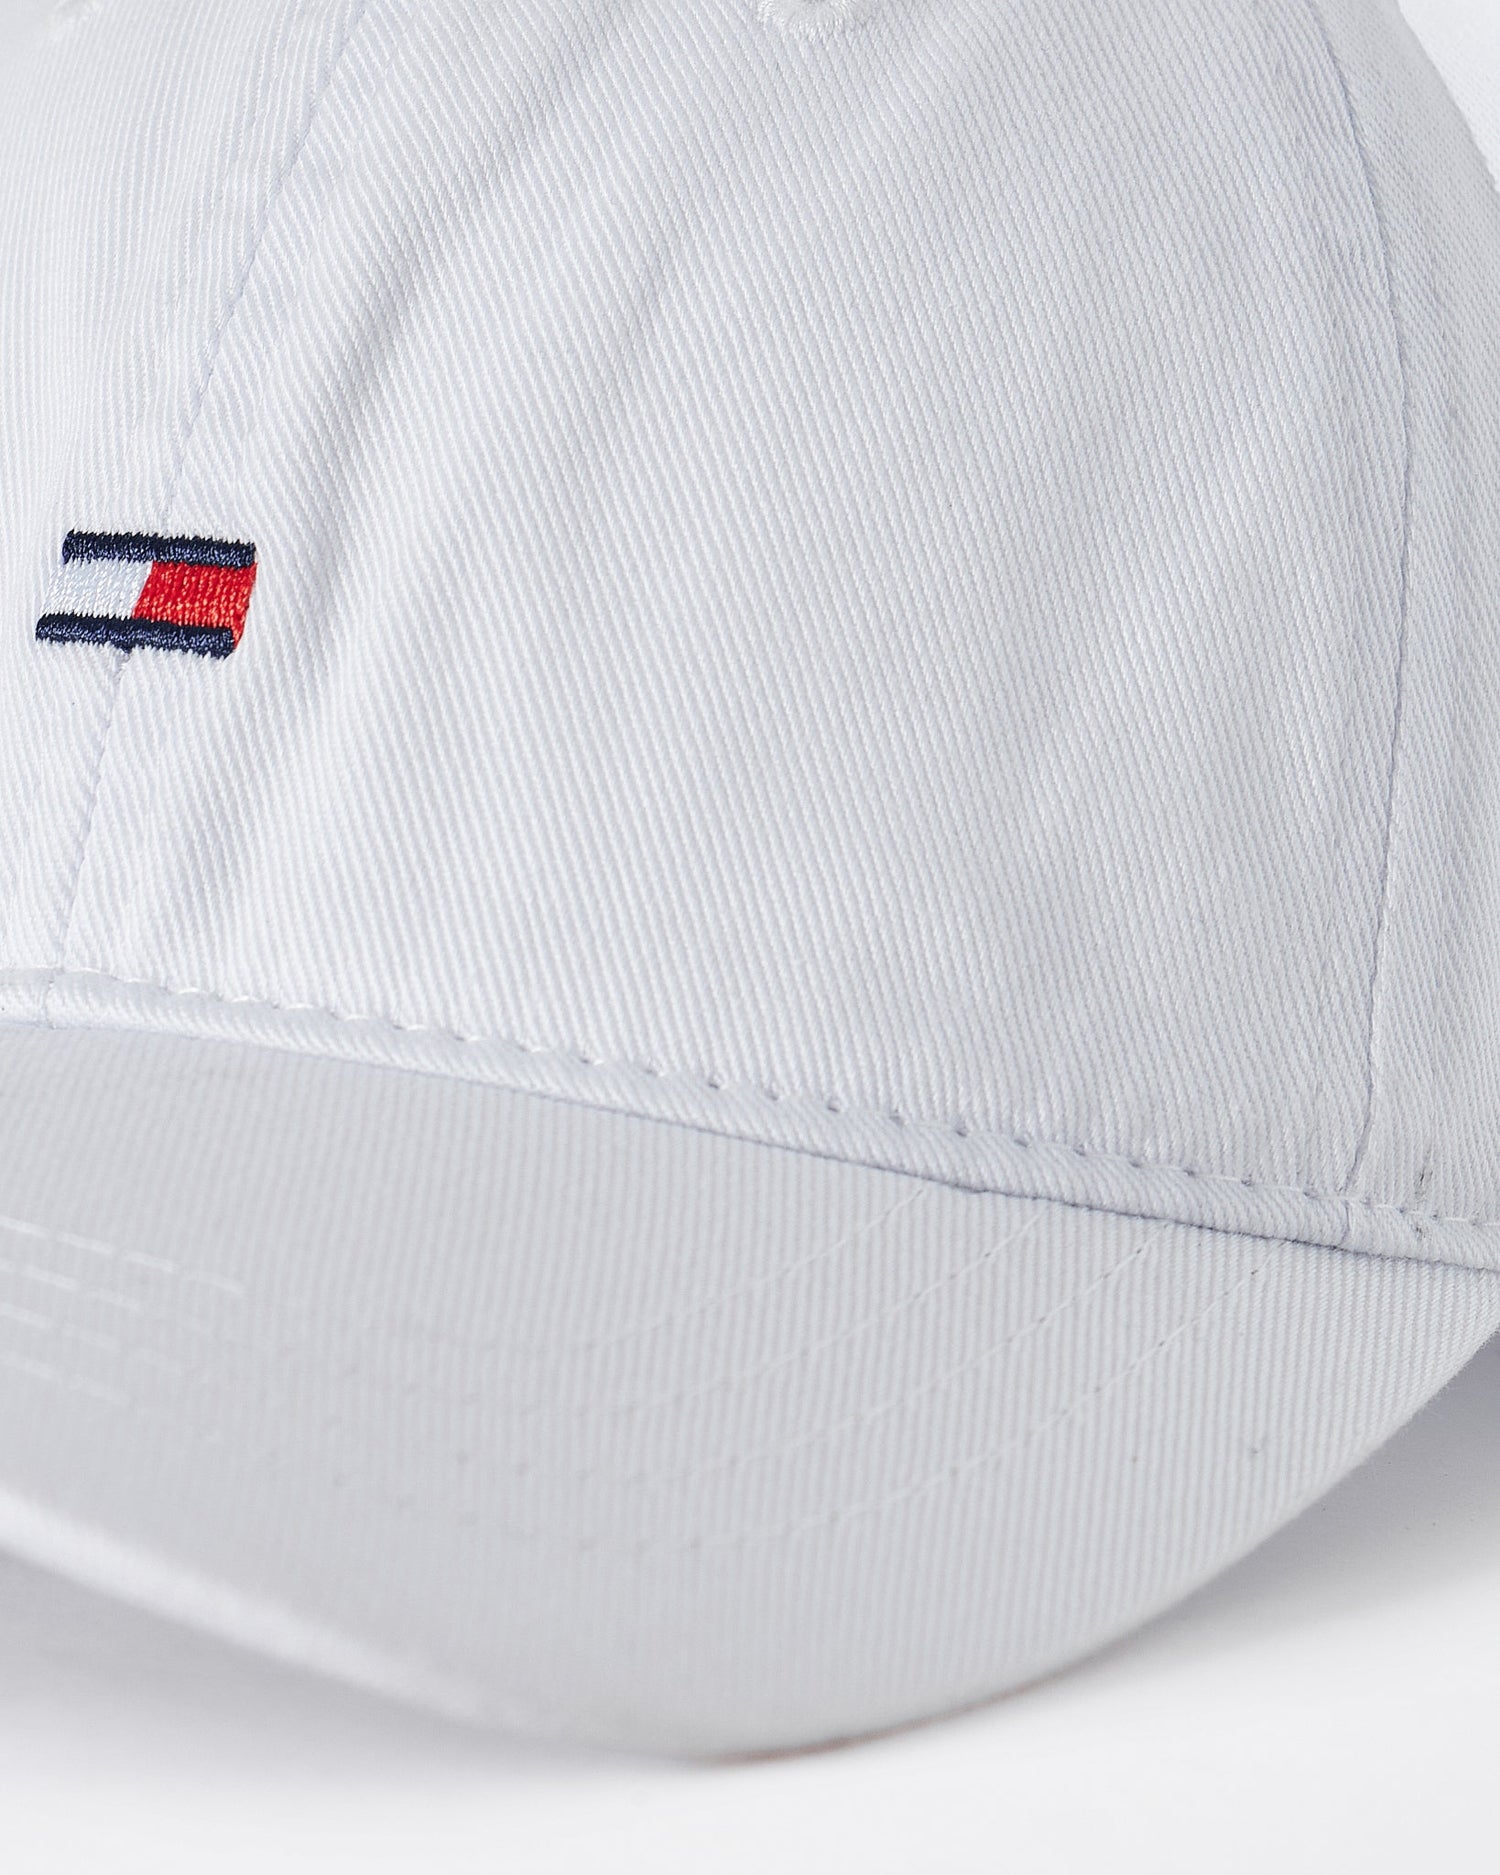 MOI OUTFIT-Tommy White Cap 11.90